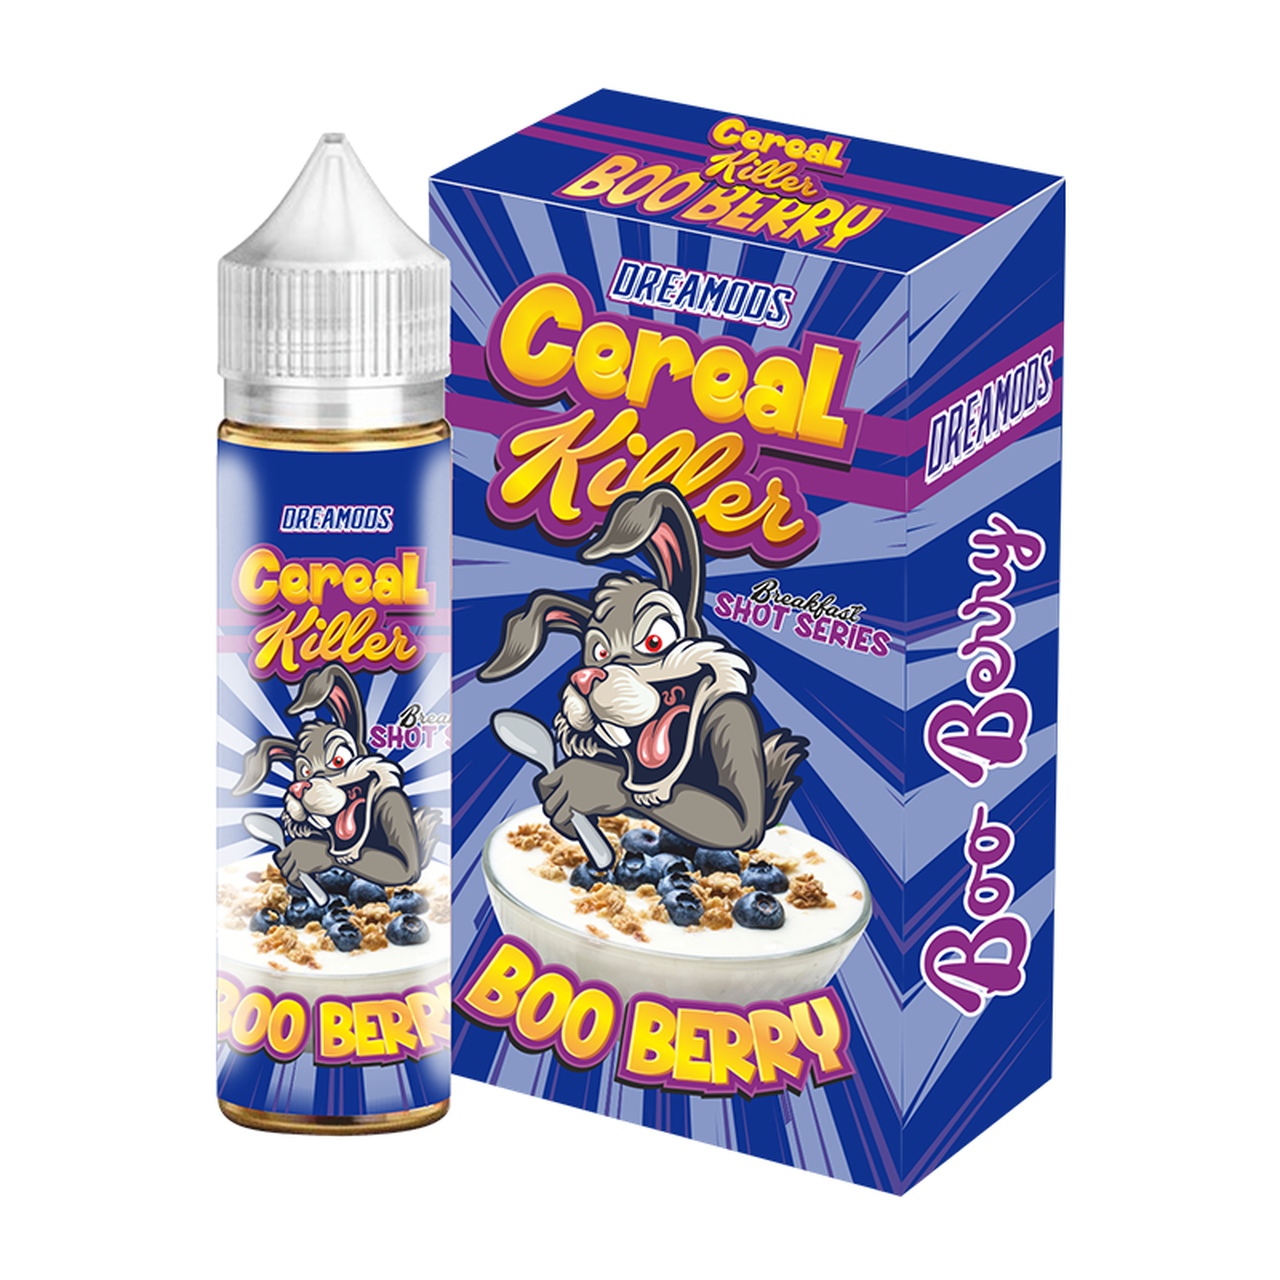 Dreamods Cereal Killer "Boo Berry"